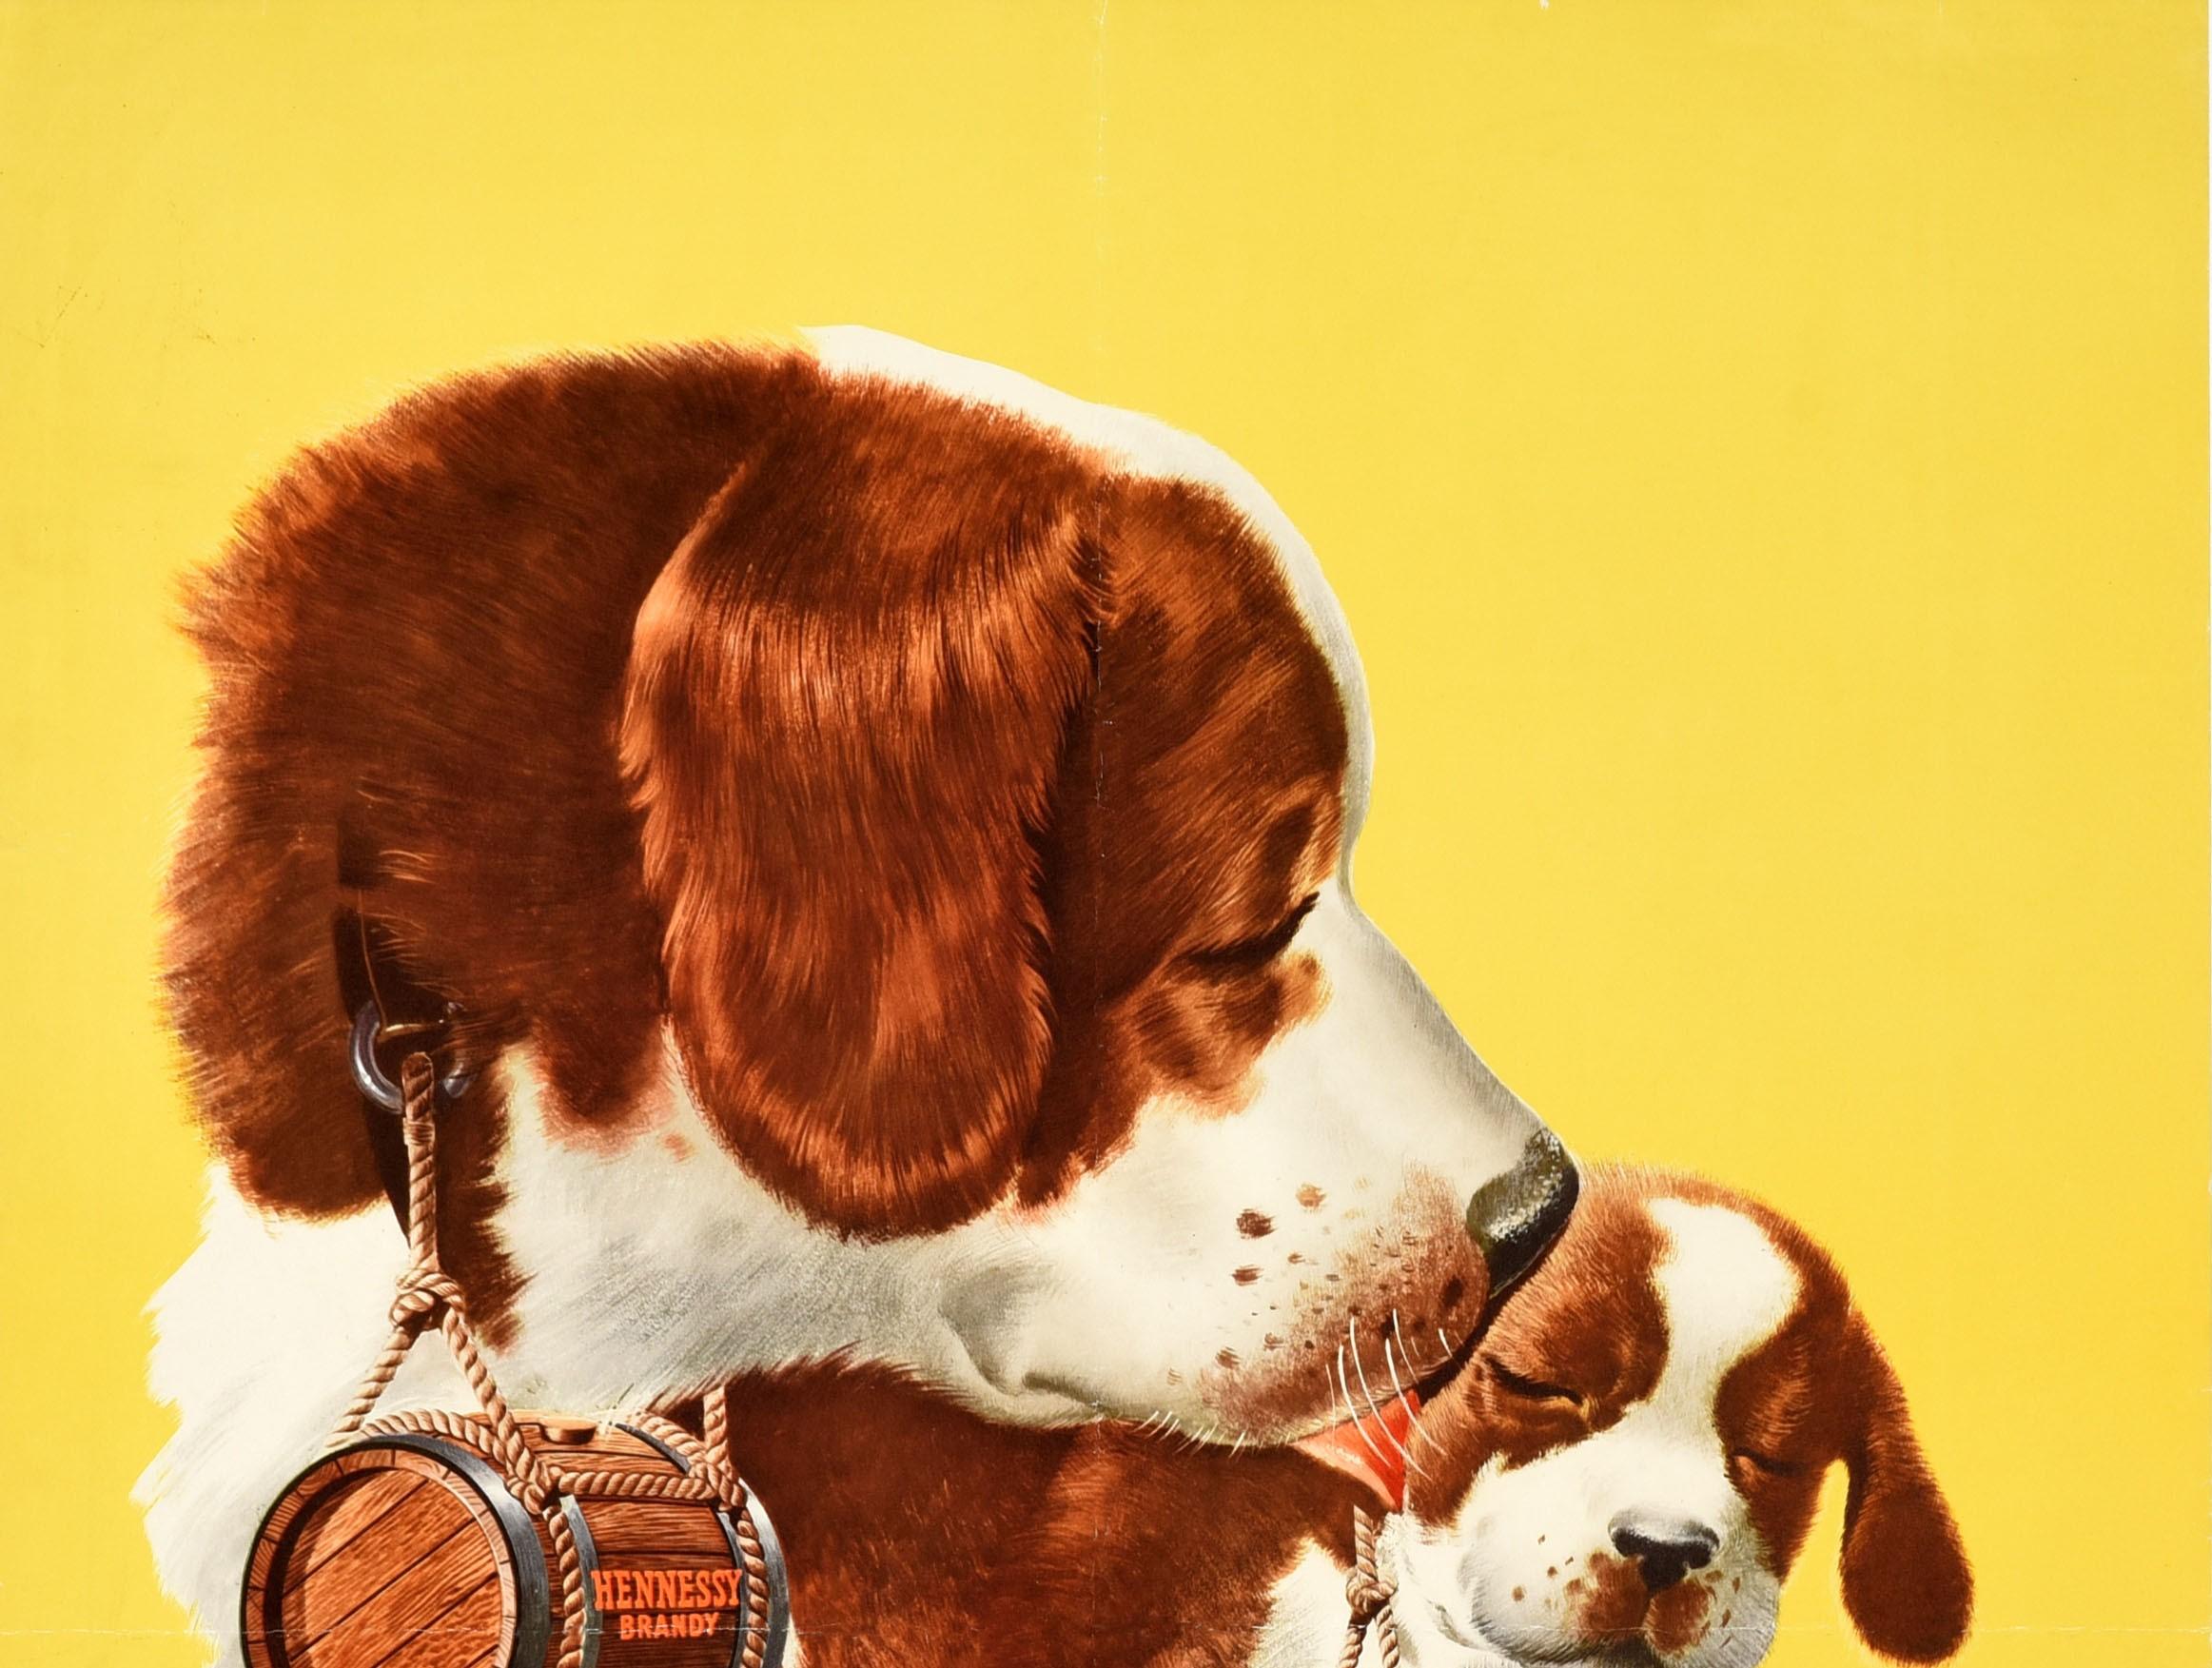 Original vintage alcohol drink advertising poster - Mother Loves Her Little Hennessy Father Does Too! Great artwork of two St Bernard dogs against a yellow background, both carrying small wooden barrels of Hennessy Brandy around their necks with the